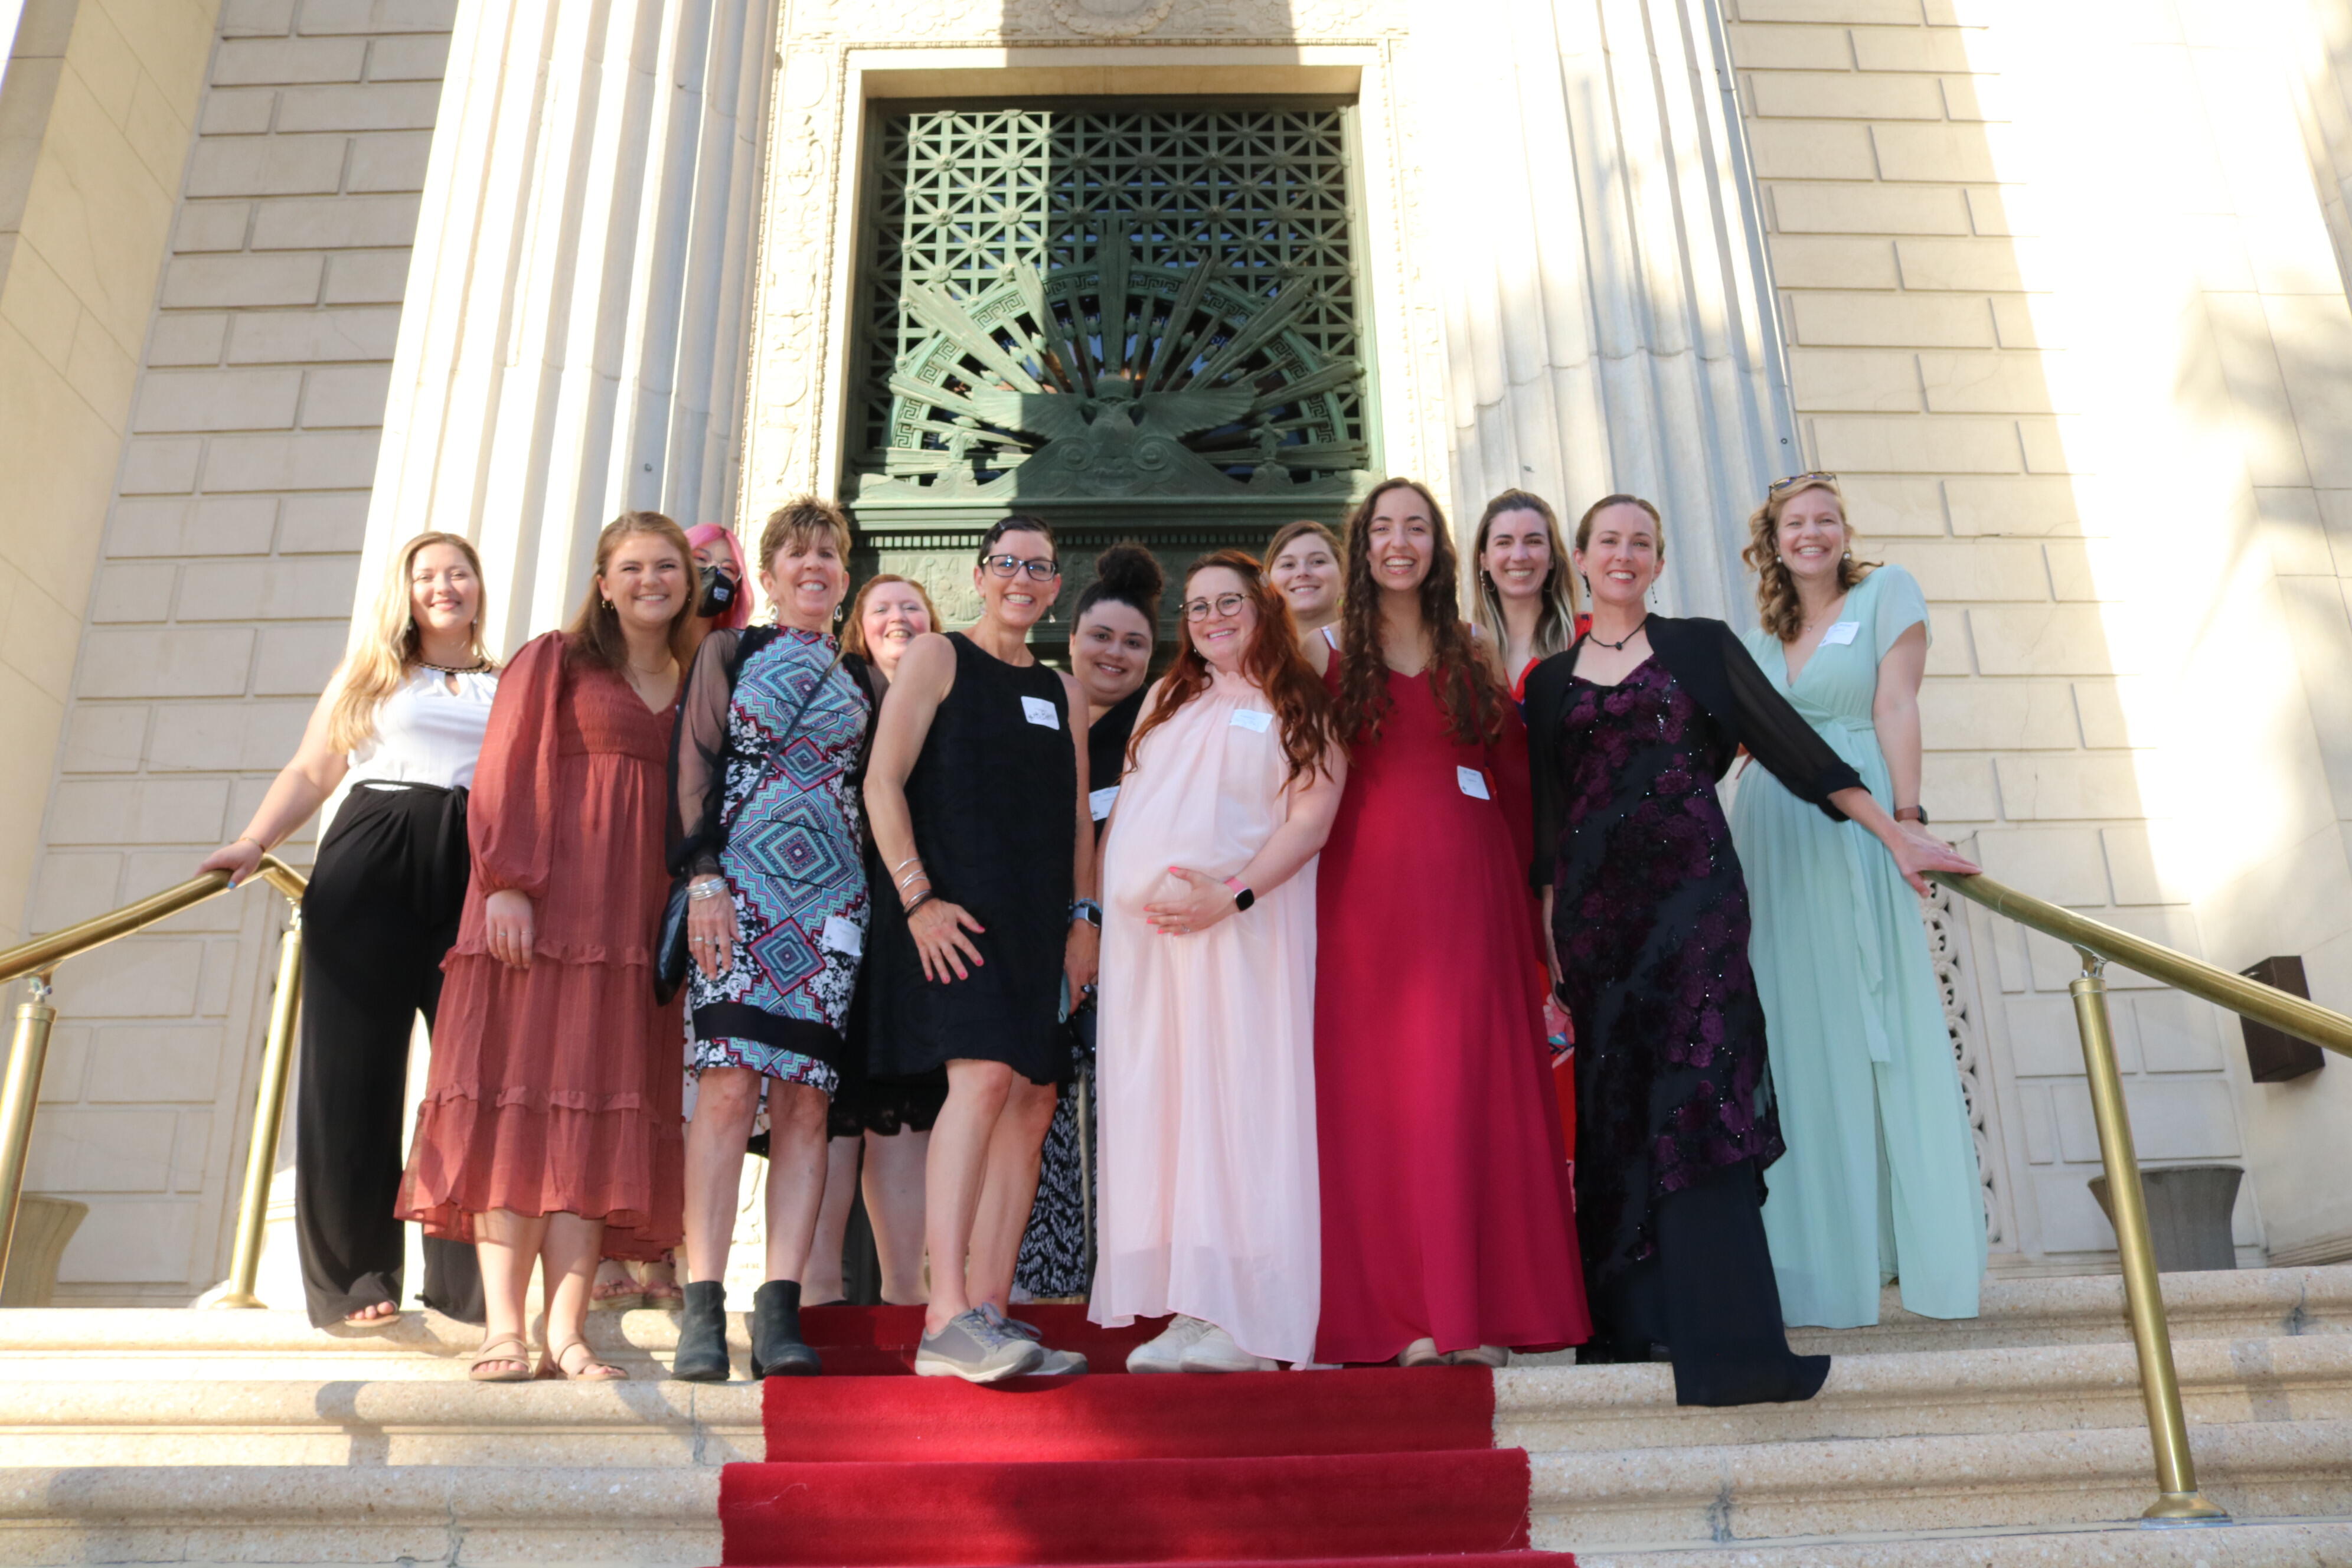 ND faculty and staff chaperones on the red carpeted steps at the Corinthian Event Center